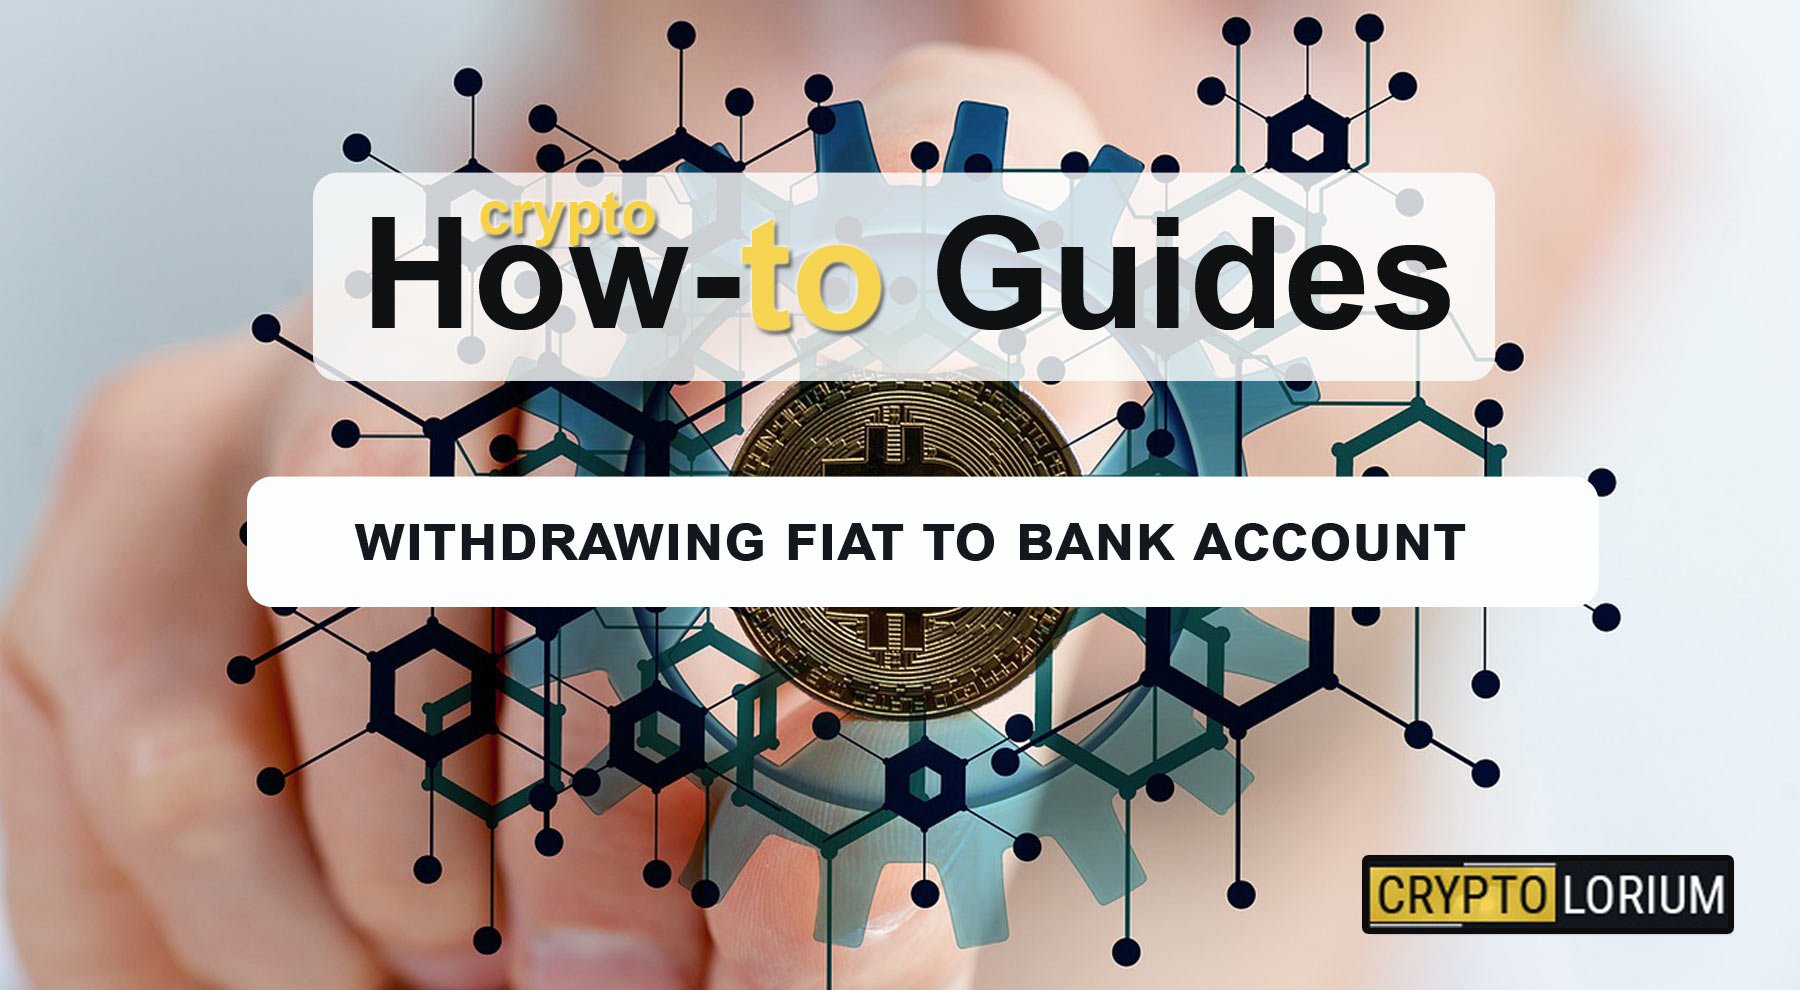 Withdraw fiat money to your bank account